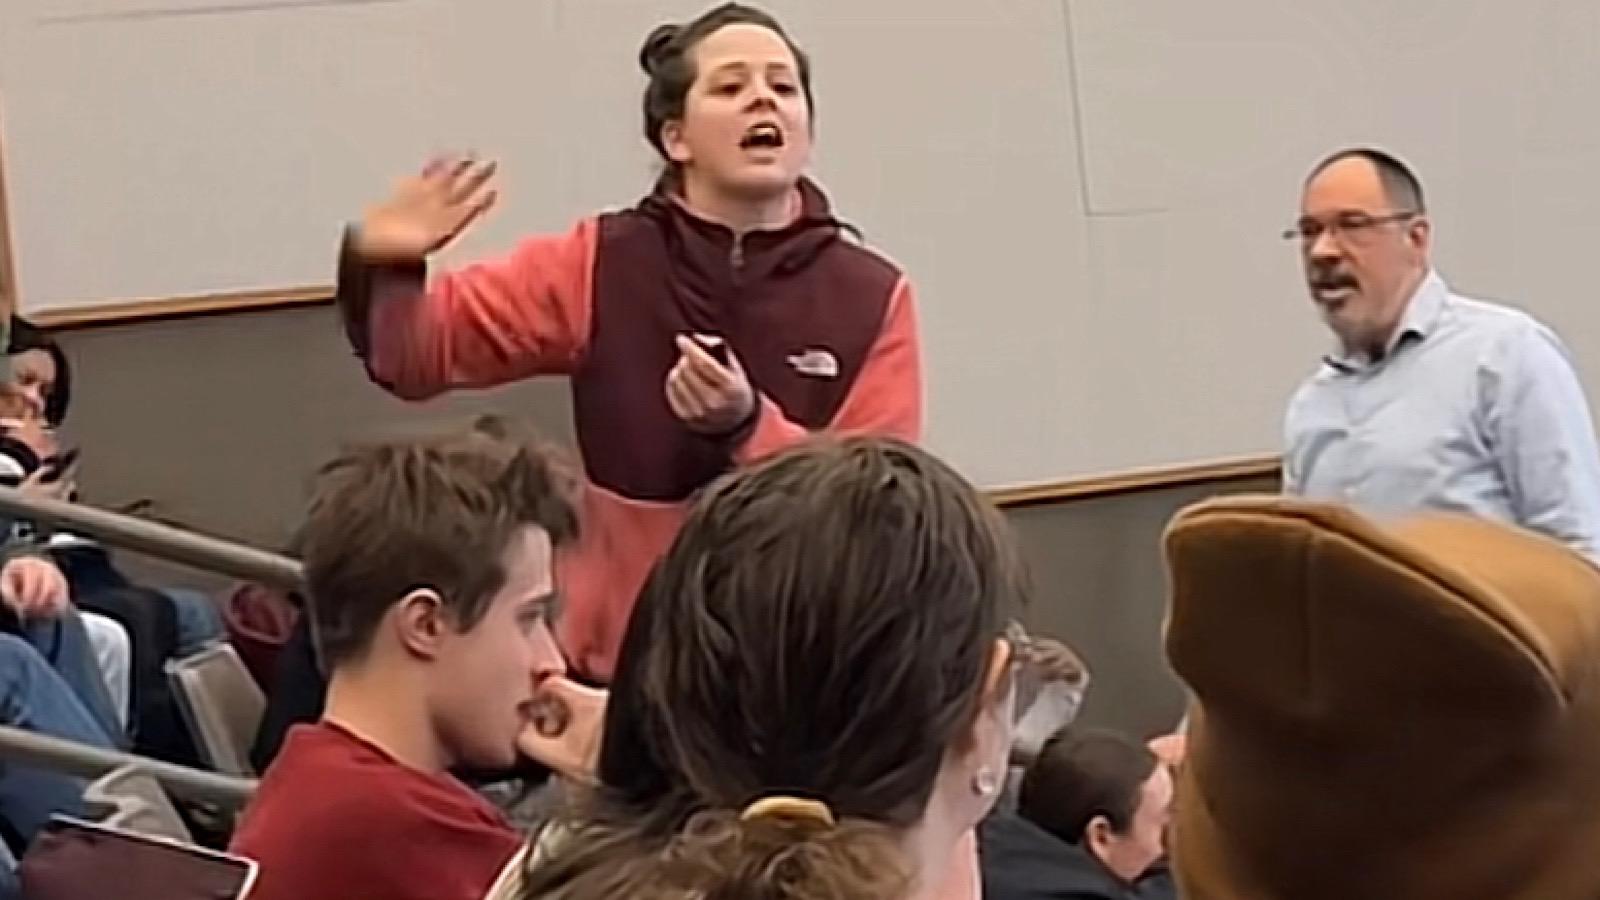 students raps in college class